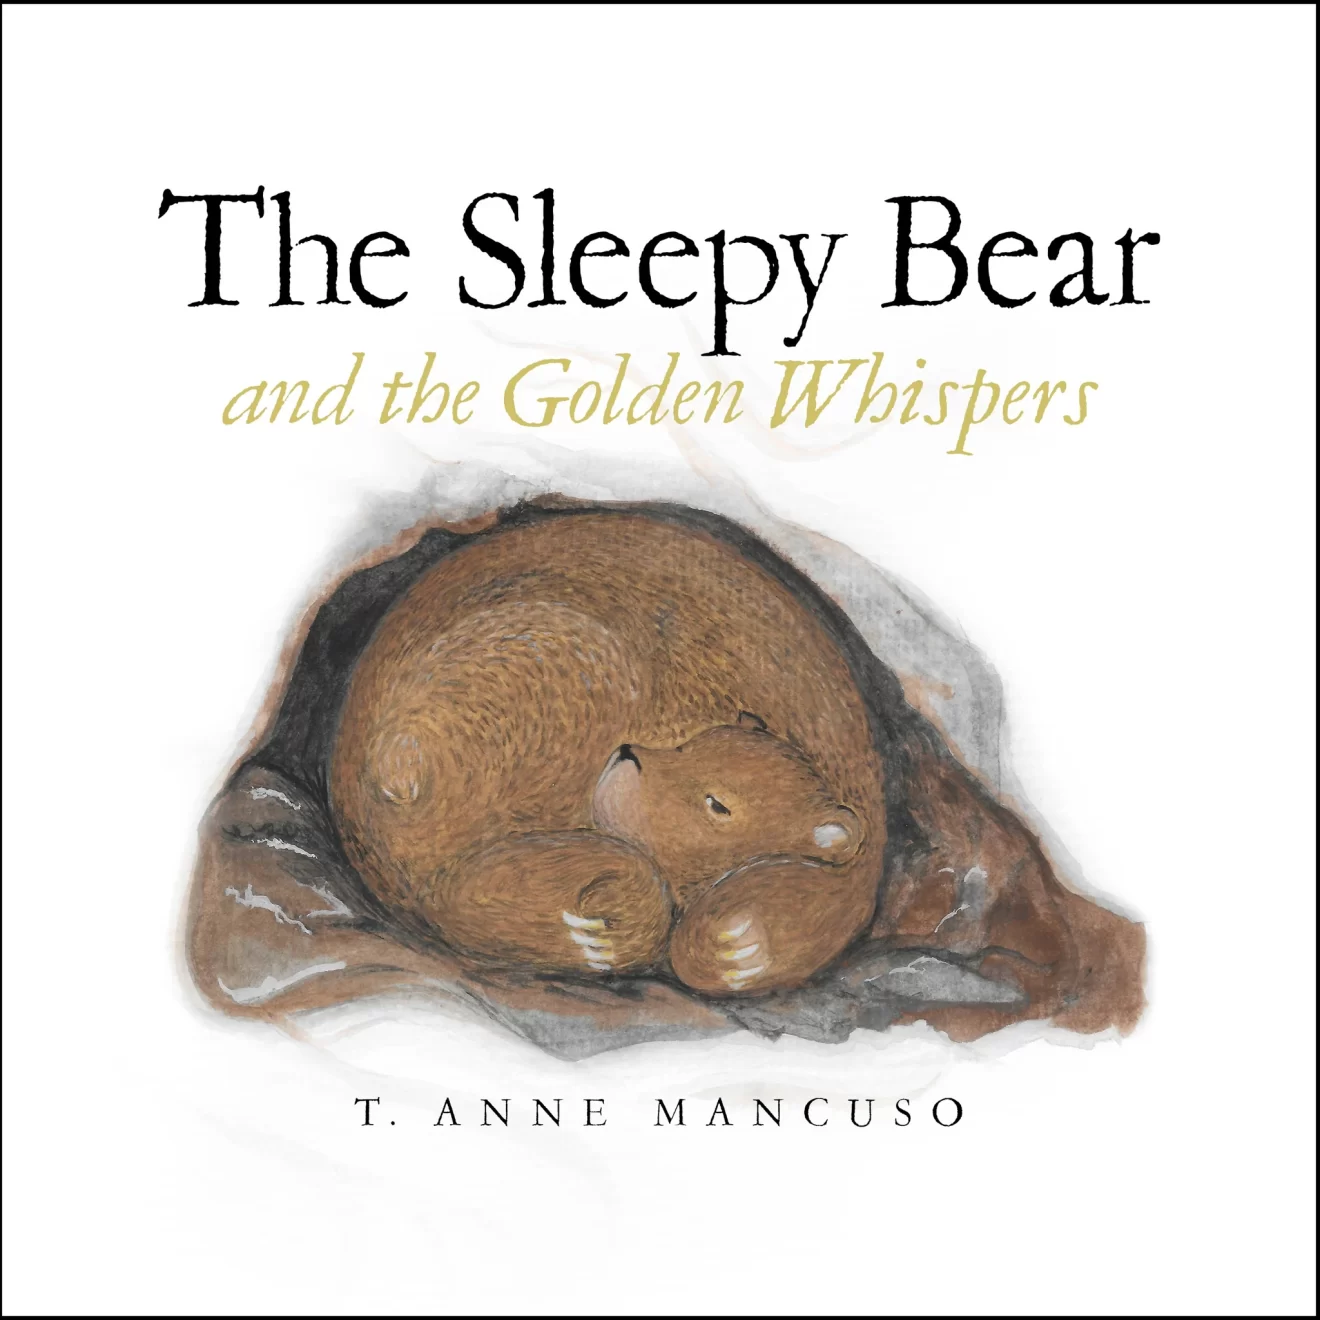 The Sleepy Bear and the Golden Whispers